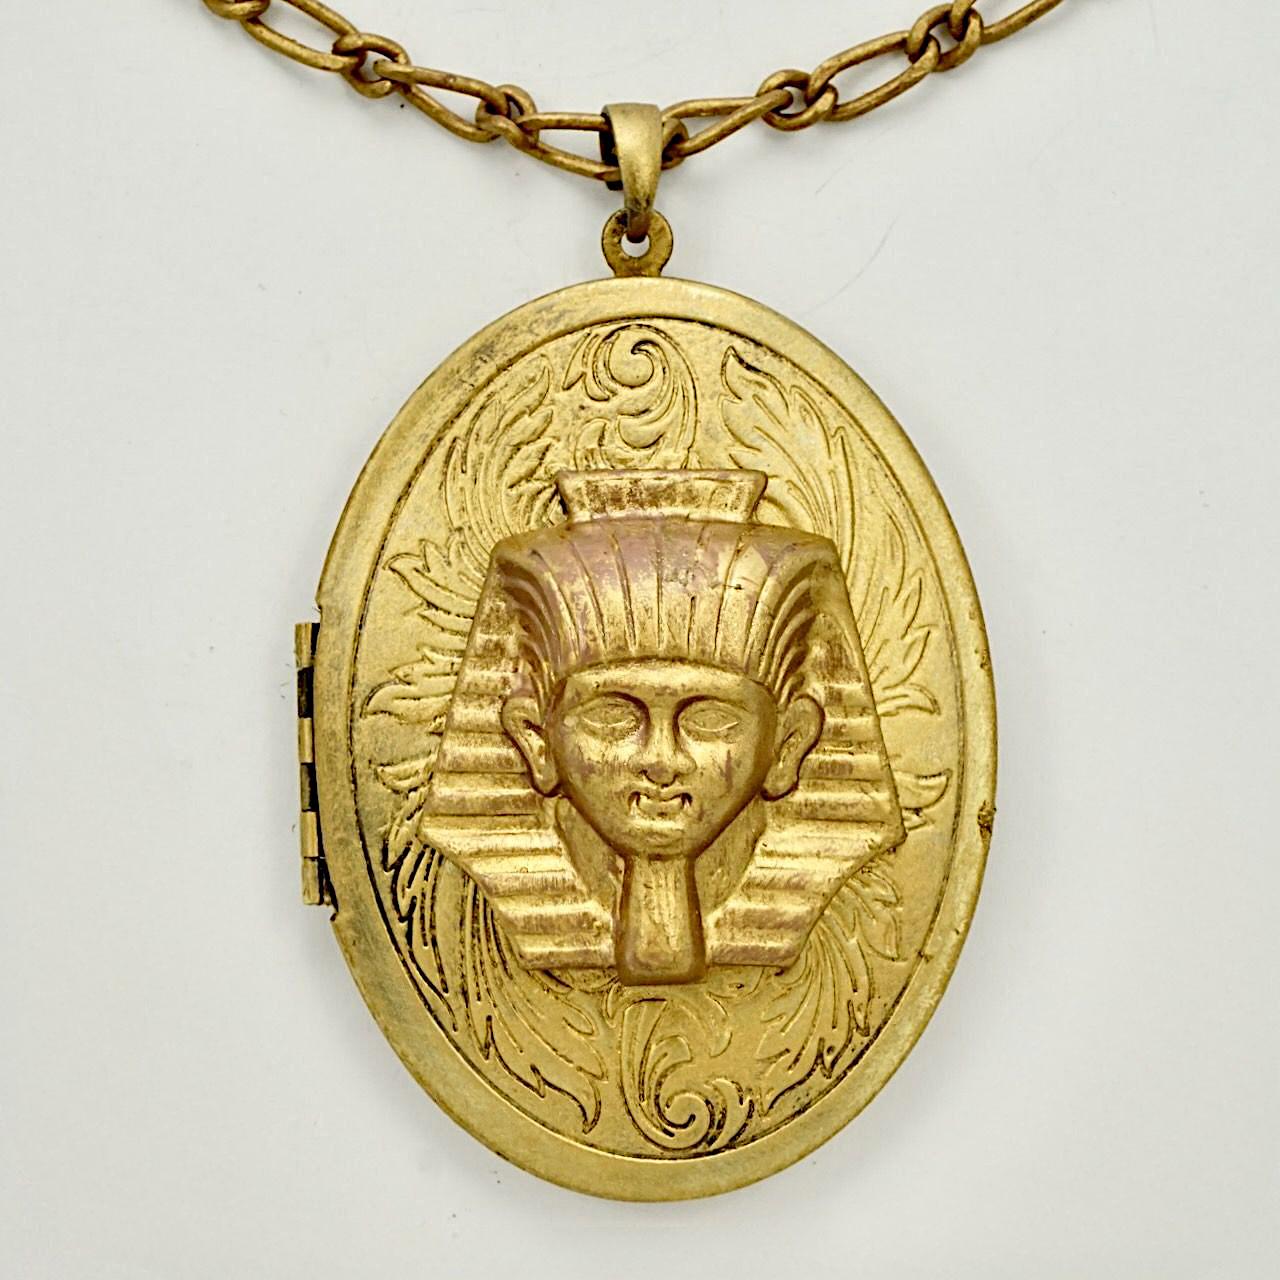 Large gilt metal pharaoh locket and chain, with the inside finished with blue enamel on one side. The locket measures length 6.4 cm / 2.5 inches by width 4.7 cm / 1.85 inches. The hinge works well, and the locket closes tightly. The chain measures